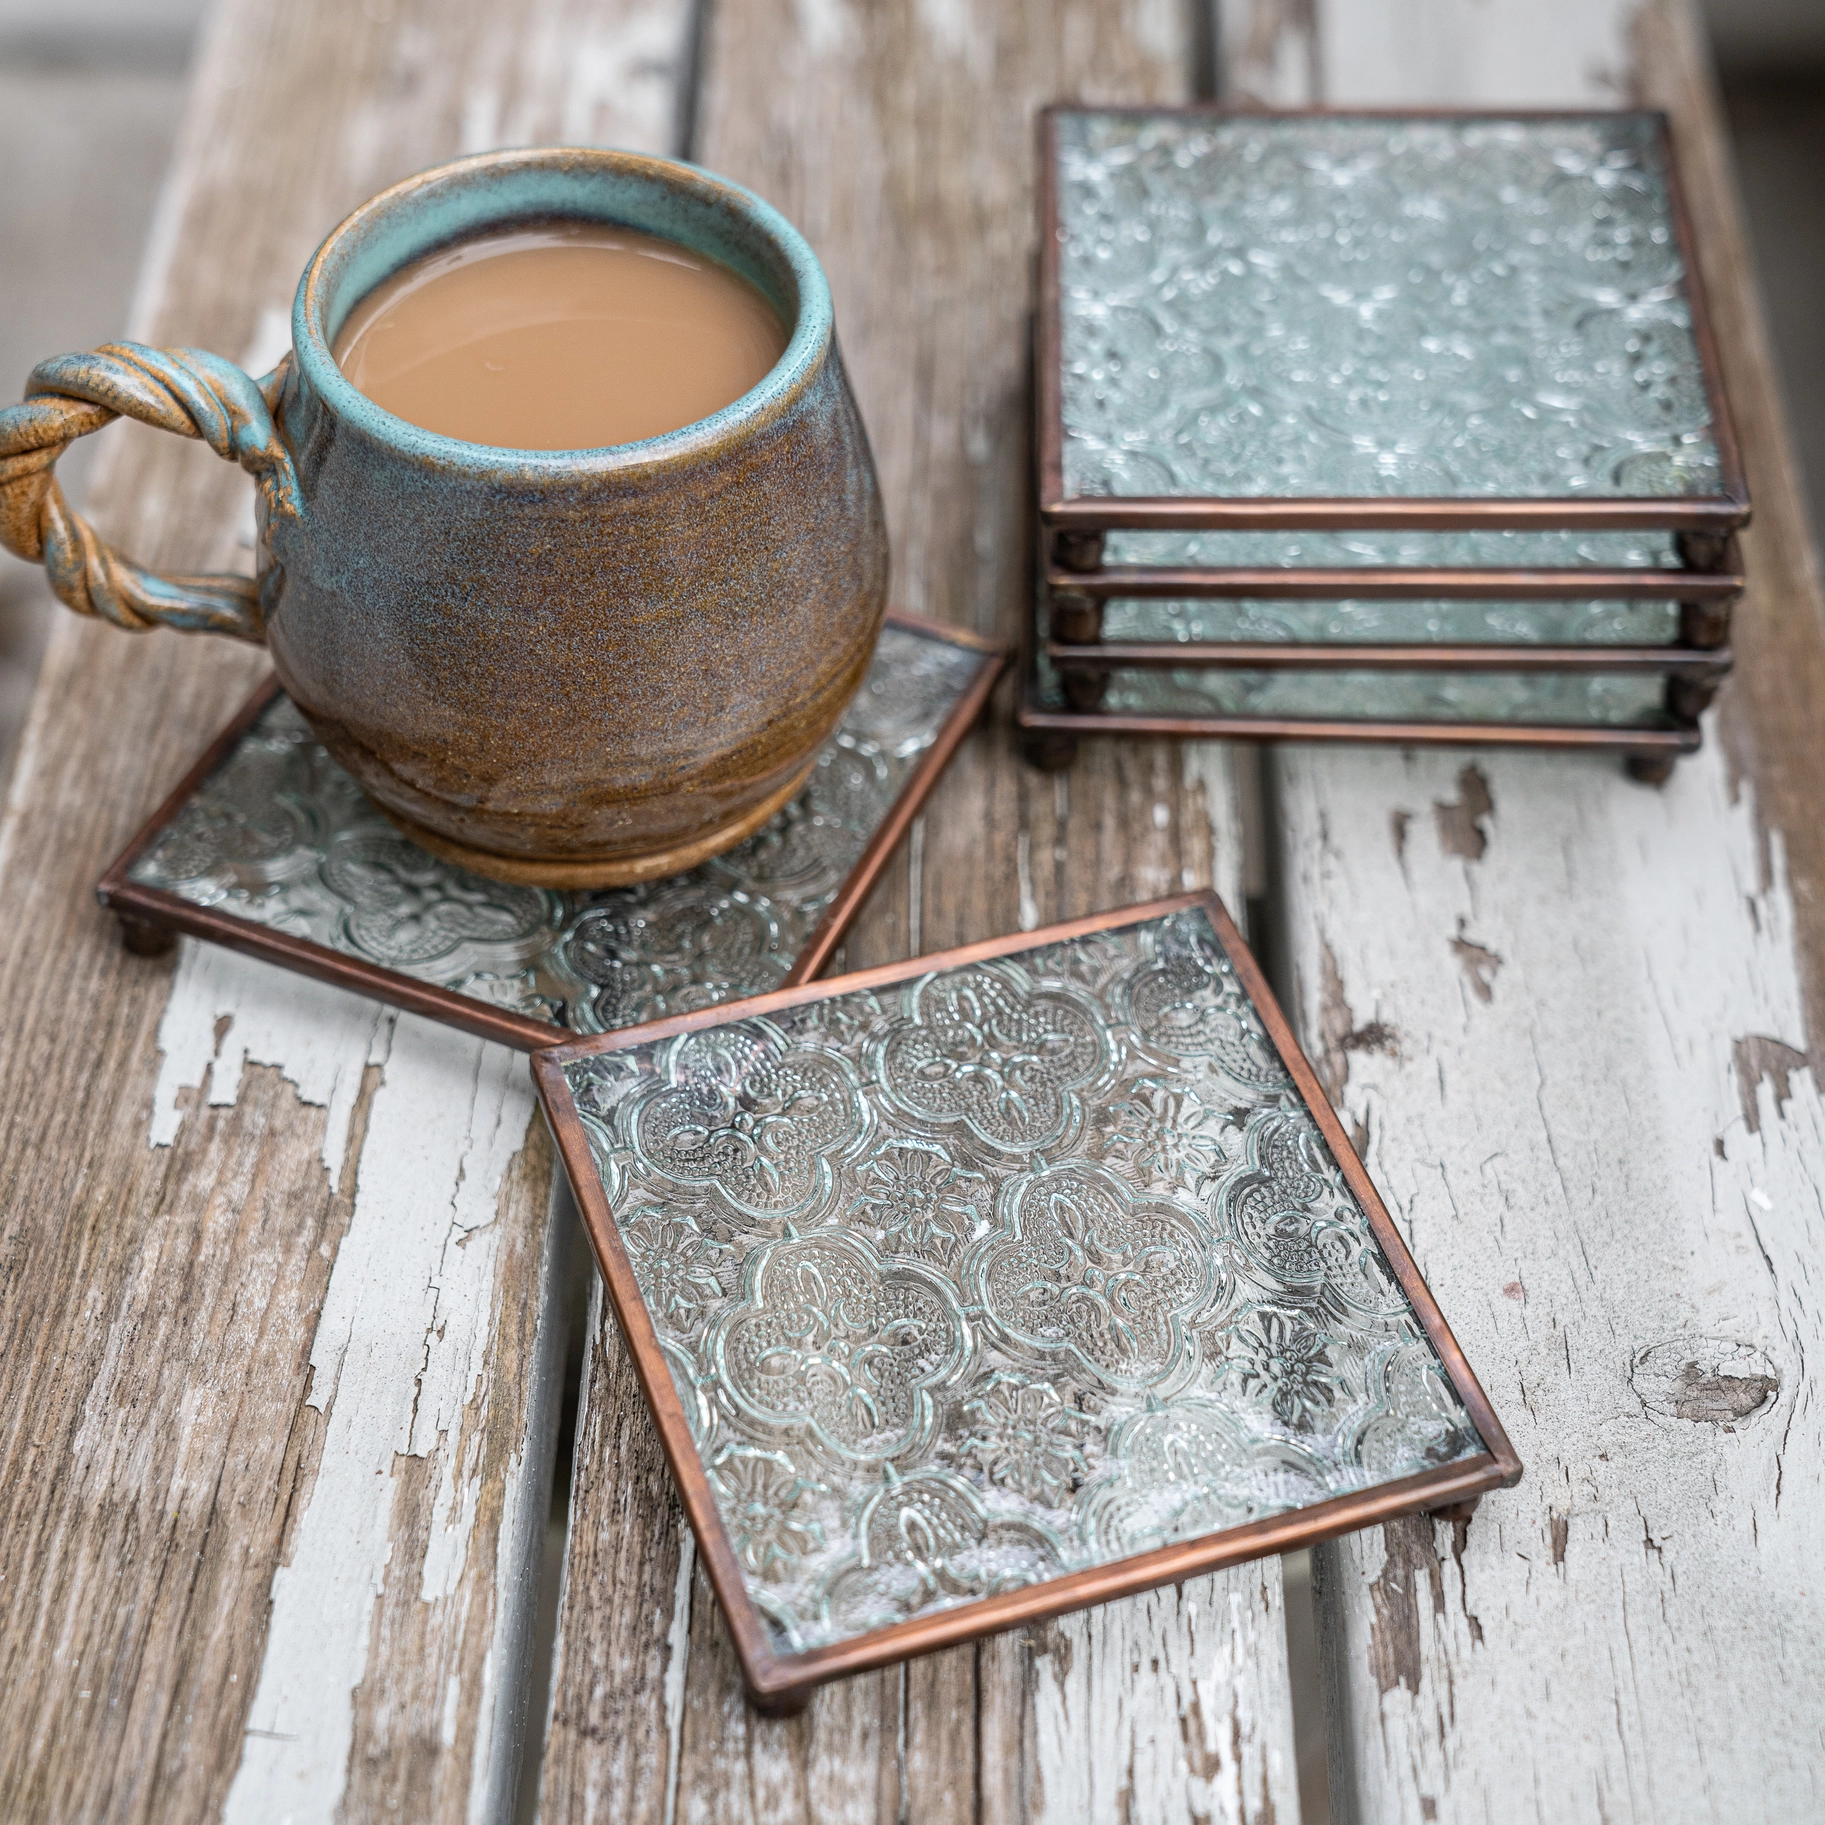 Six patterned copper and glass pillar plates, four stacked and one holding a mug of tea on a wooden bench.